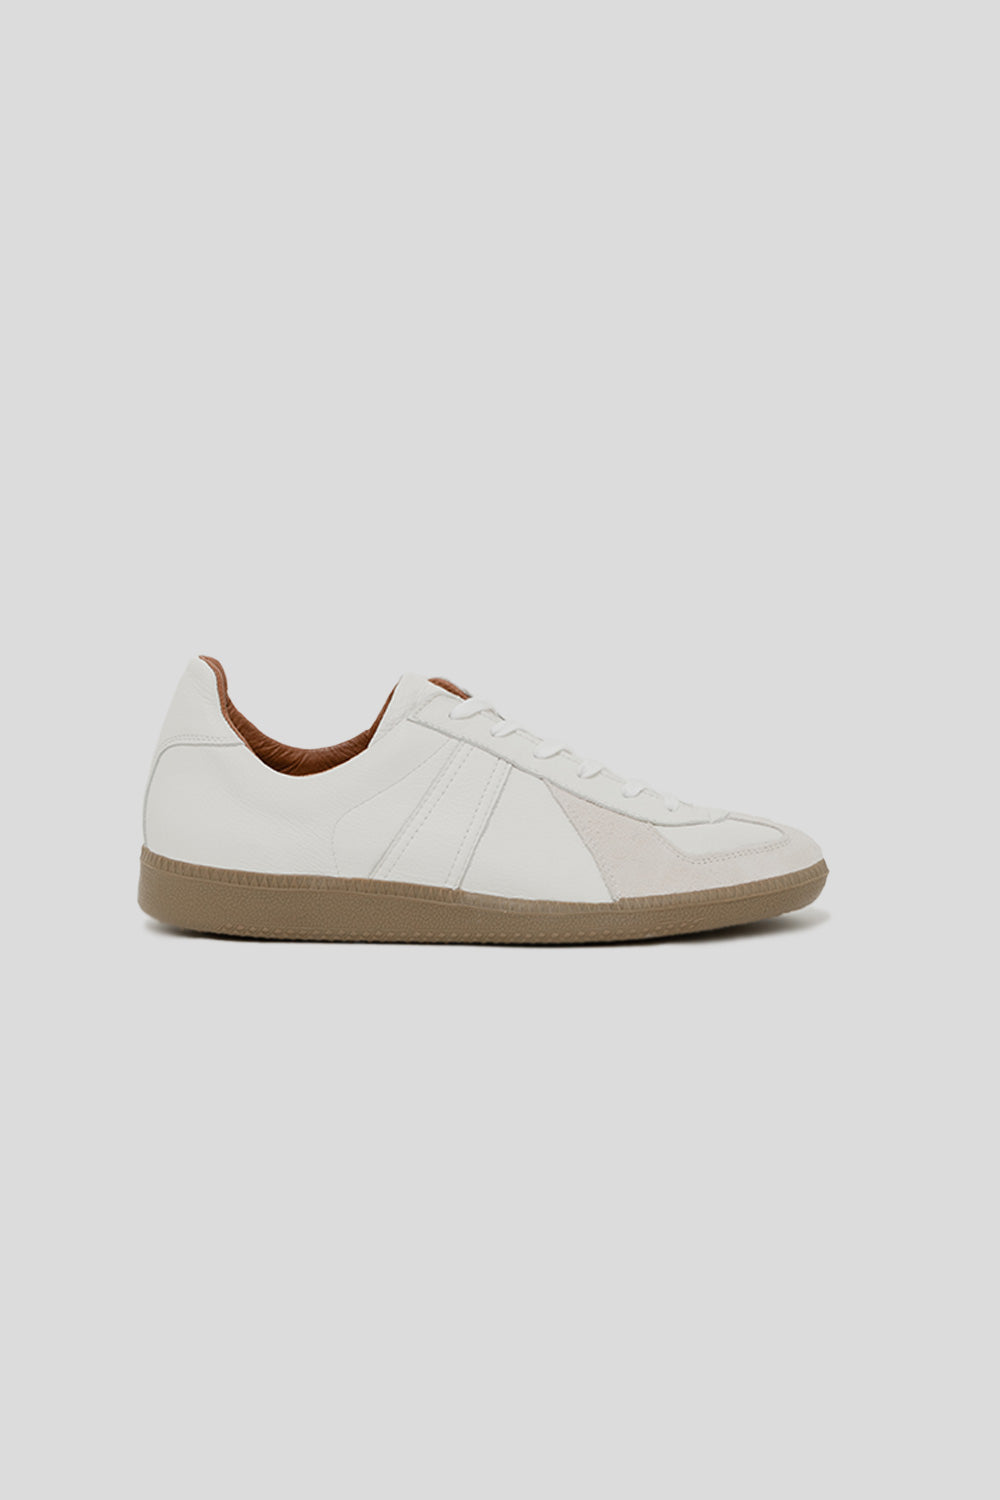 Reproduction of Found German Military Trainer Shoe in White